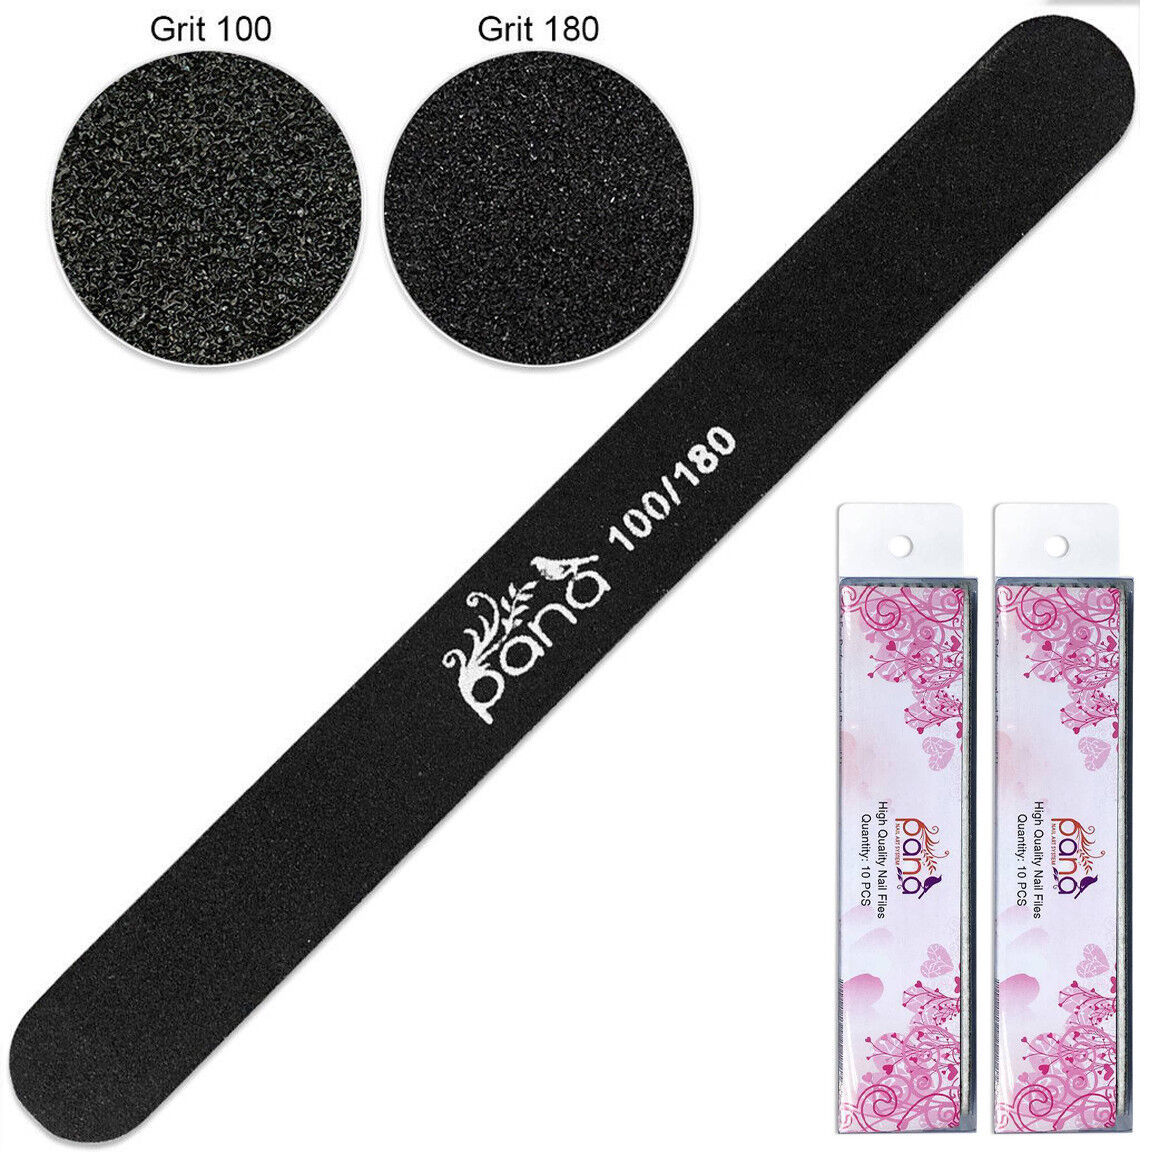 Primary image for 20Pcs Professional Round Black Nail Files Double Sided Grit 100/180